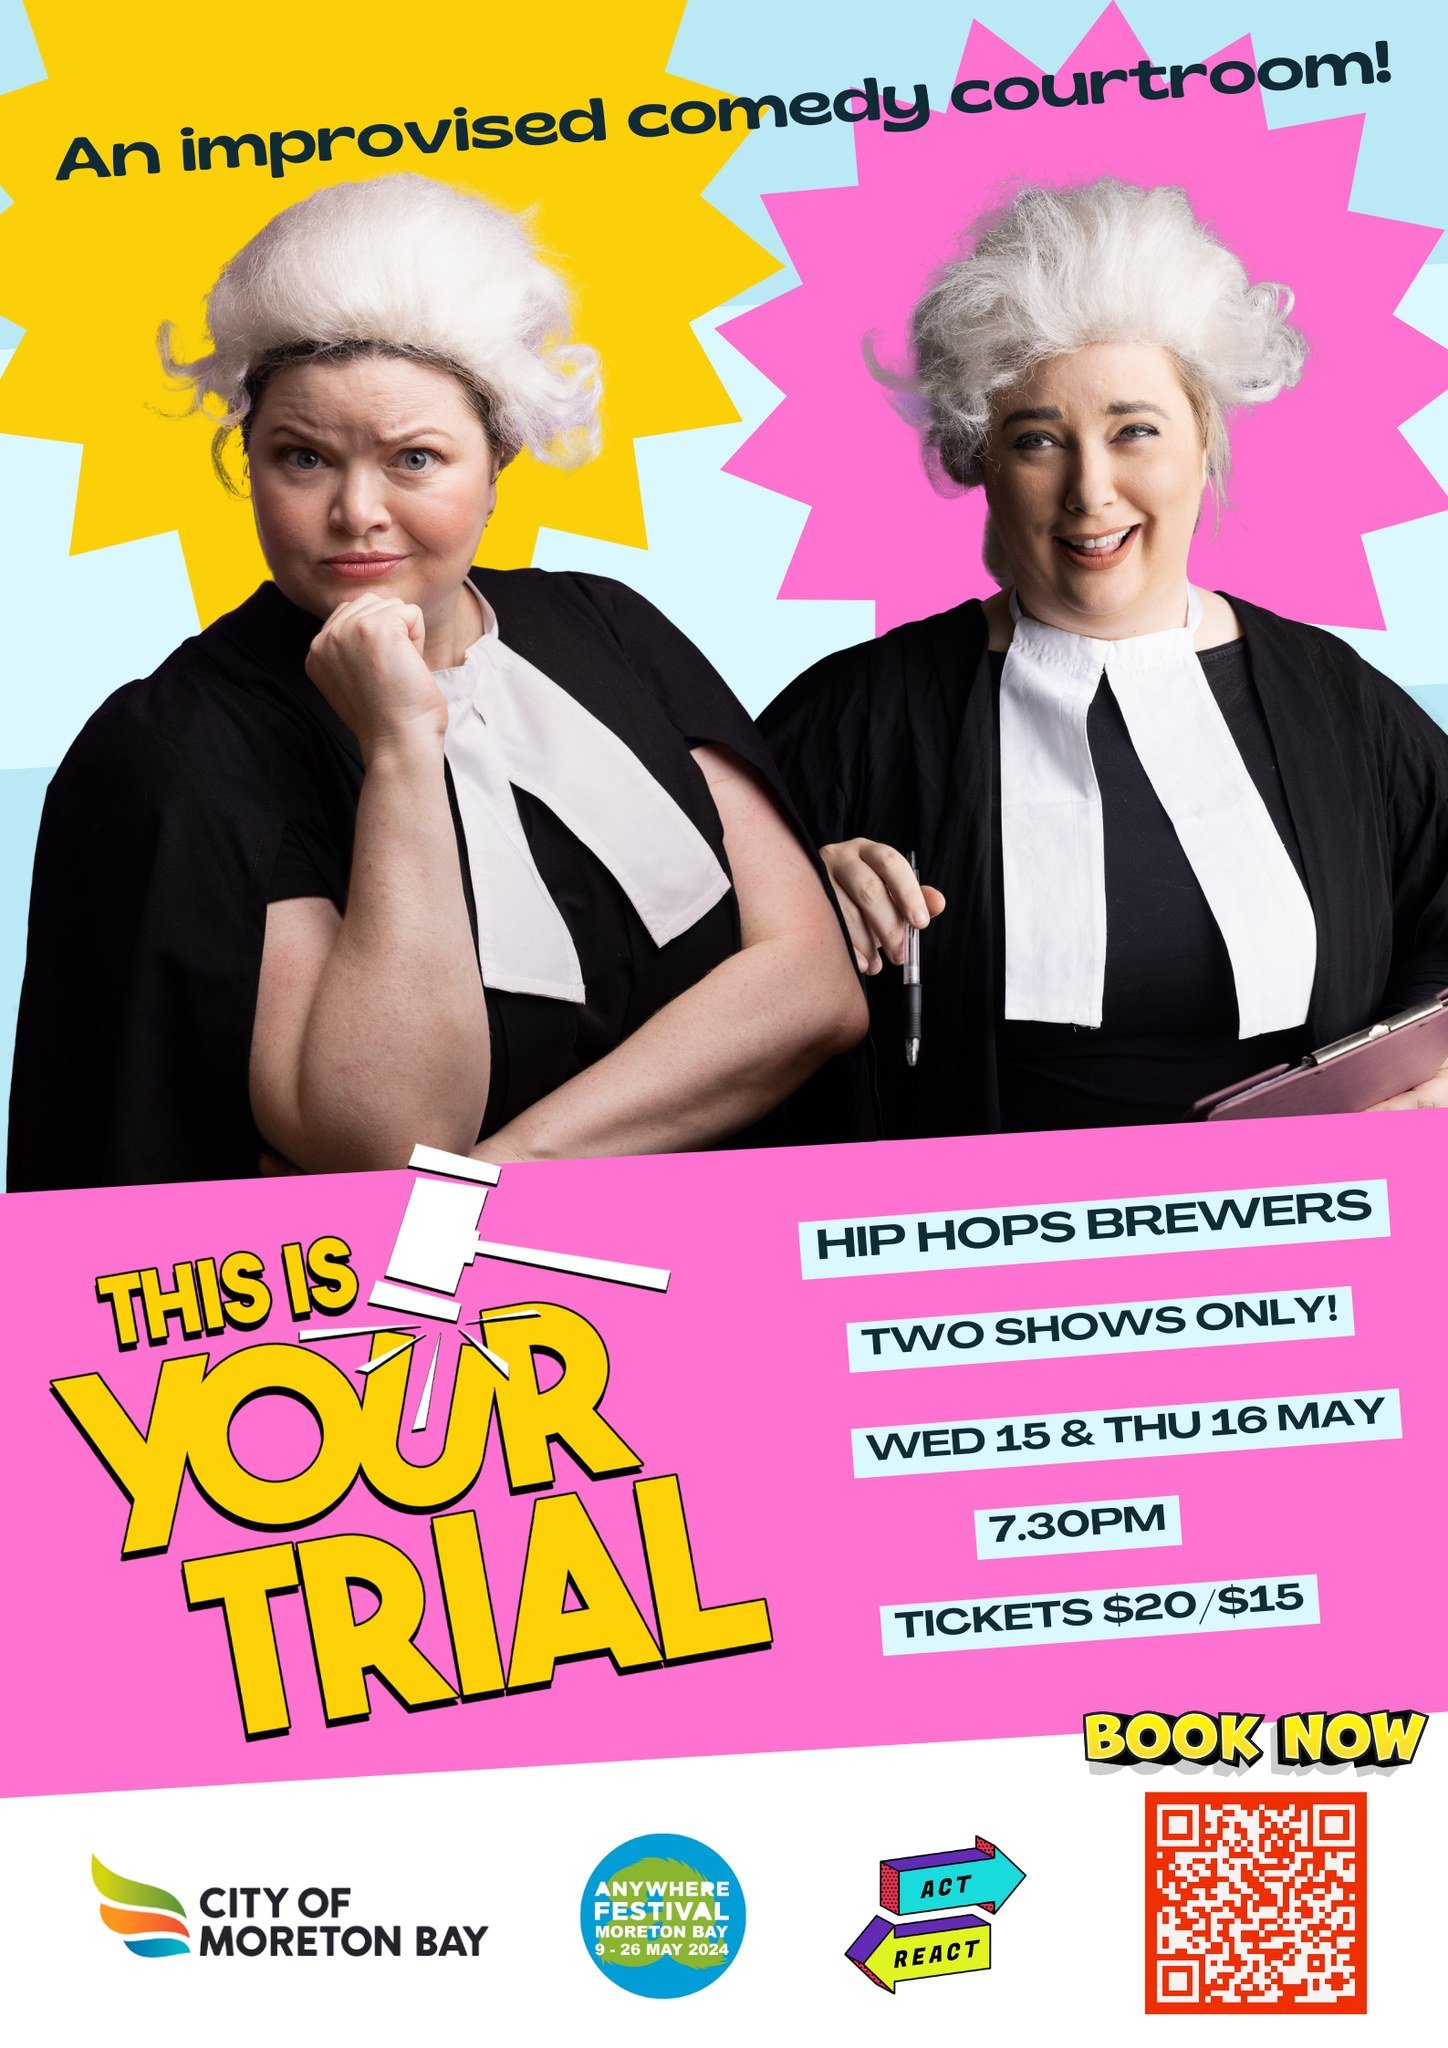 Chuckle chasers in Moreton Bay - legal laughs are a week away! 

Join us at Hip Hops Brewers on Wed May 15 and Thurs May 16 for &quot;This Is Your Trial&quot; as part of Anywhere Festival Moreton Bay.

Grab a delicious brew and settle in to settle so